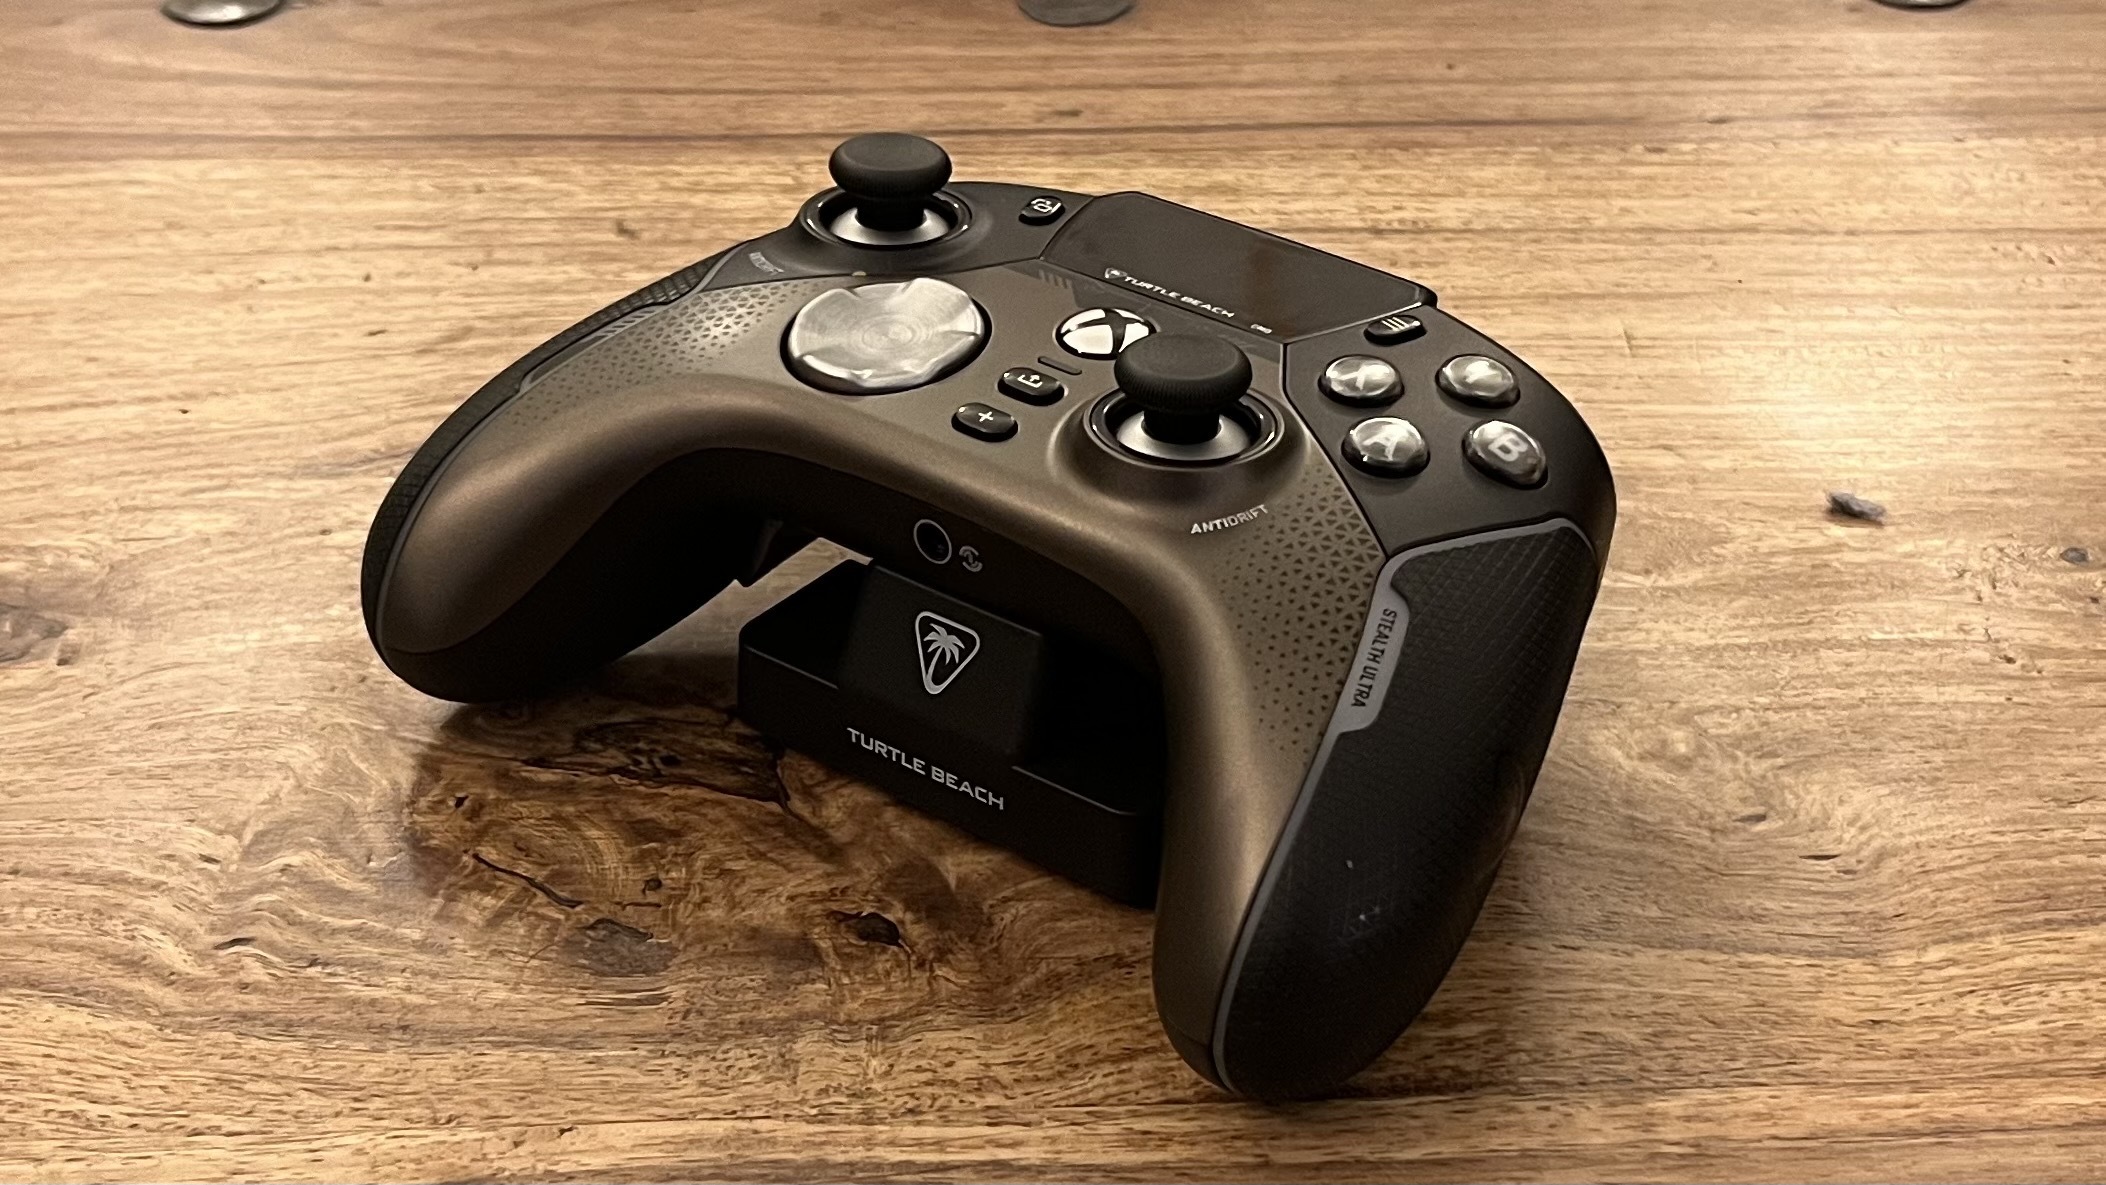 Turtle Beach unveils Stealth Ultra, a smart gaming controller with a screen  for your social media